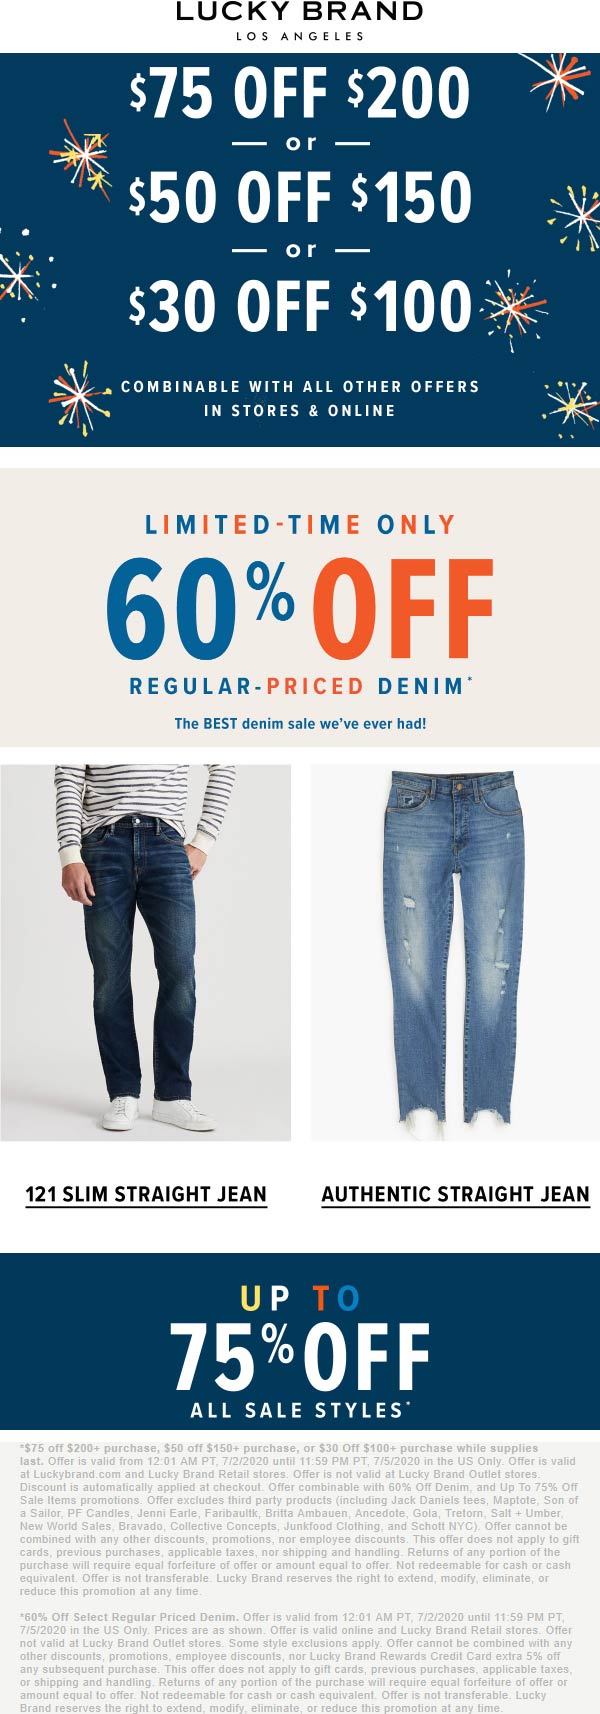 Lucky Brand stores Coupon  $30 off $100 & more today at Lucky Brand, ditto online #luckybrand